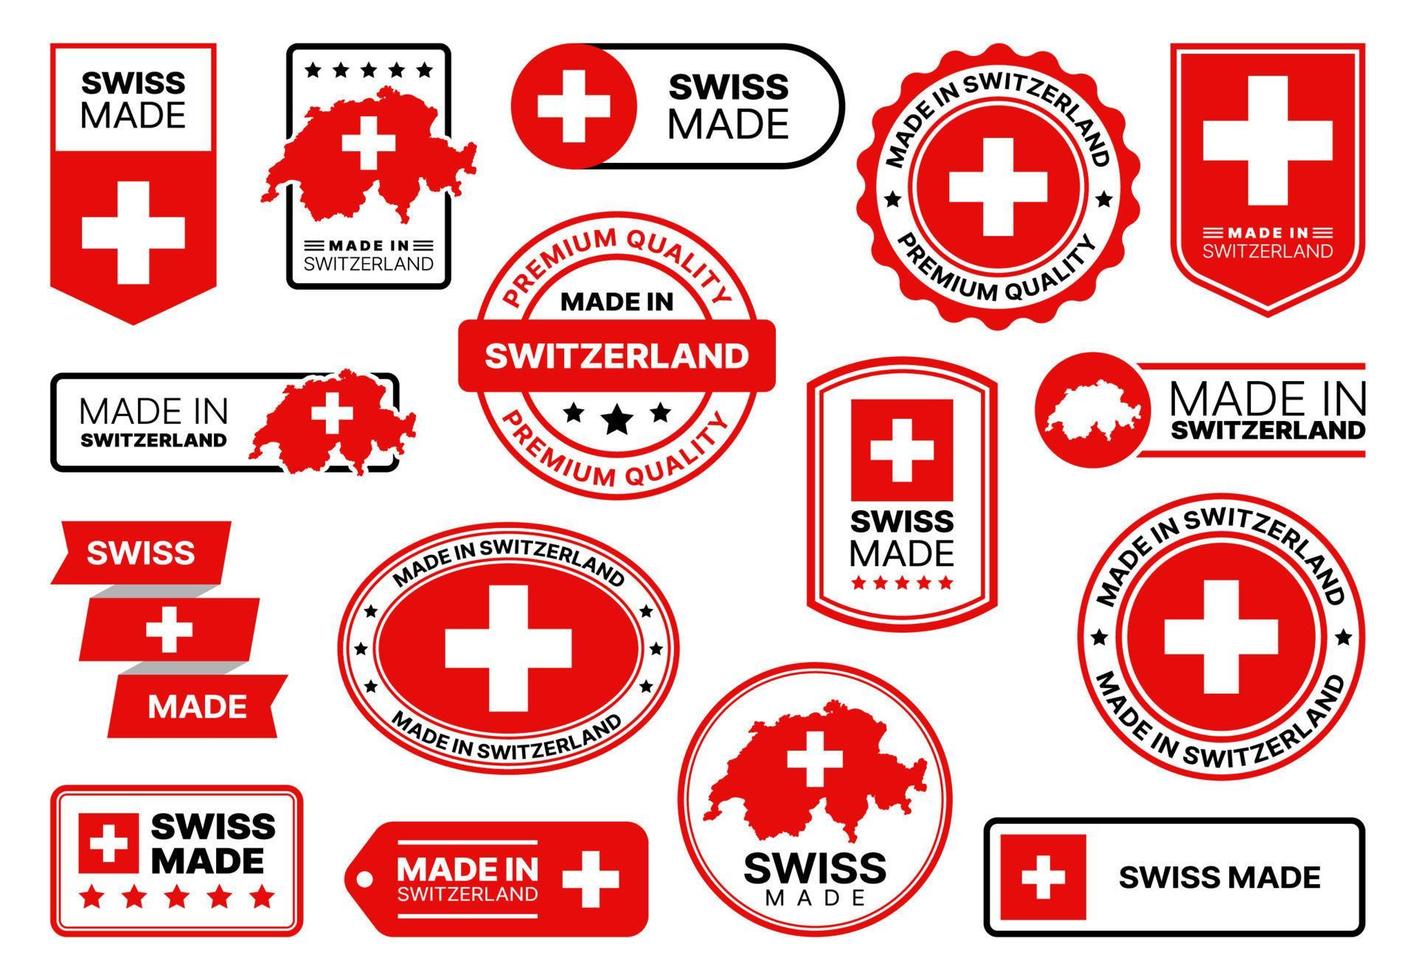 Made in Switzerland, Swiss quality icons vector